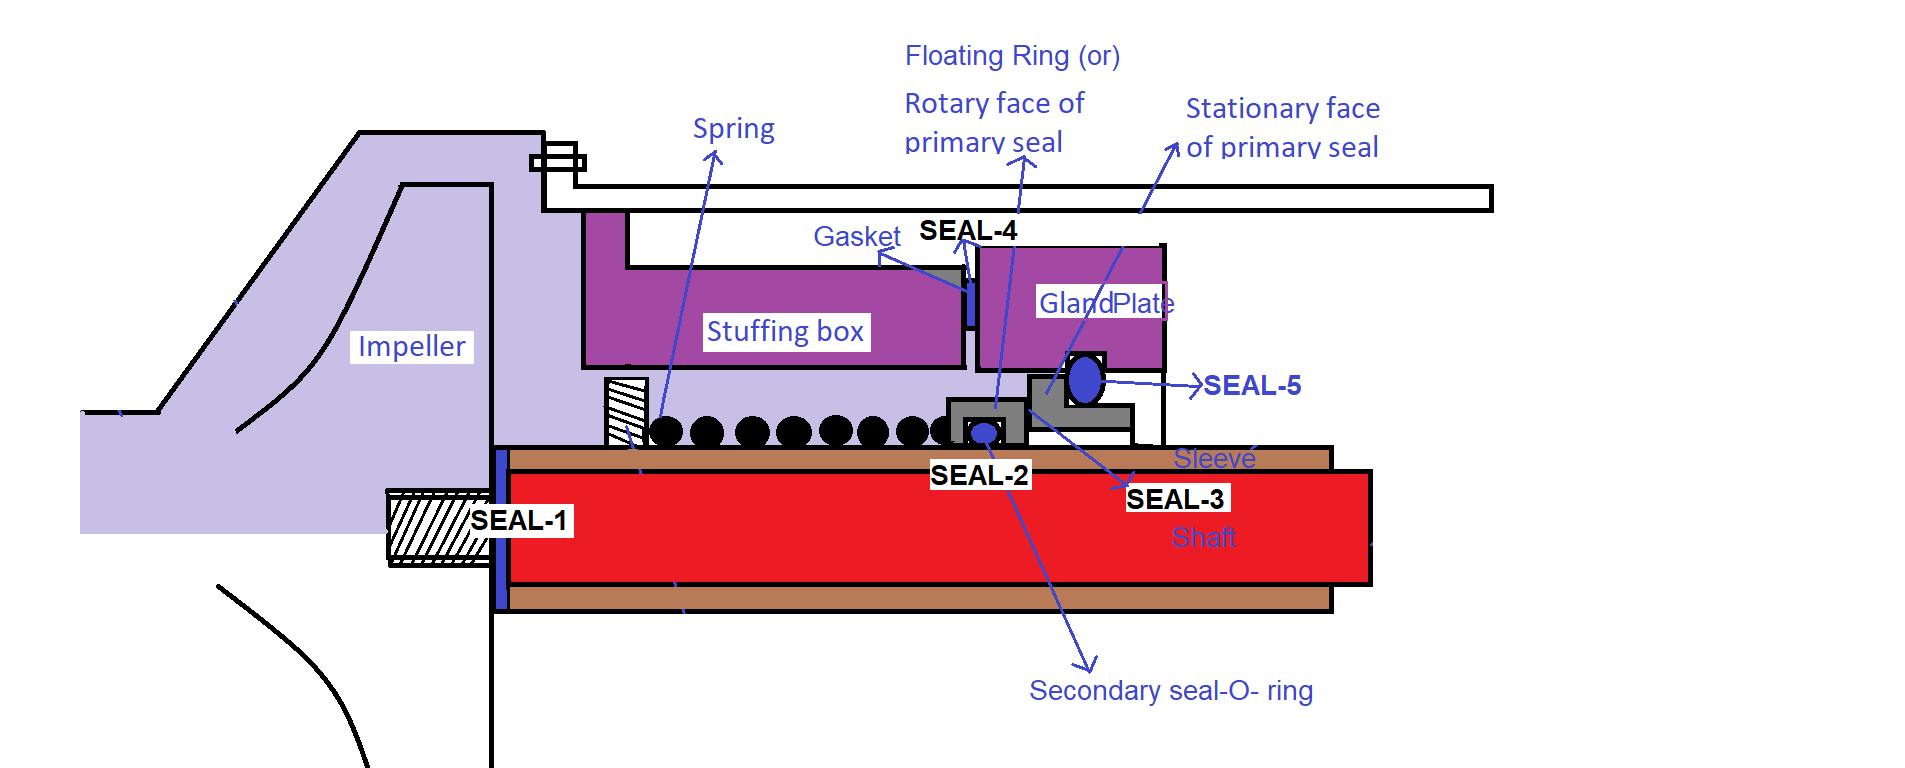 5 Different Seal Points of a Typical Mechanical Seal